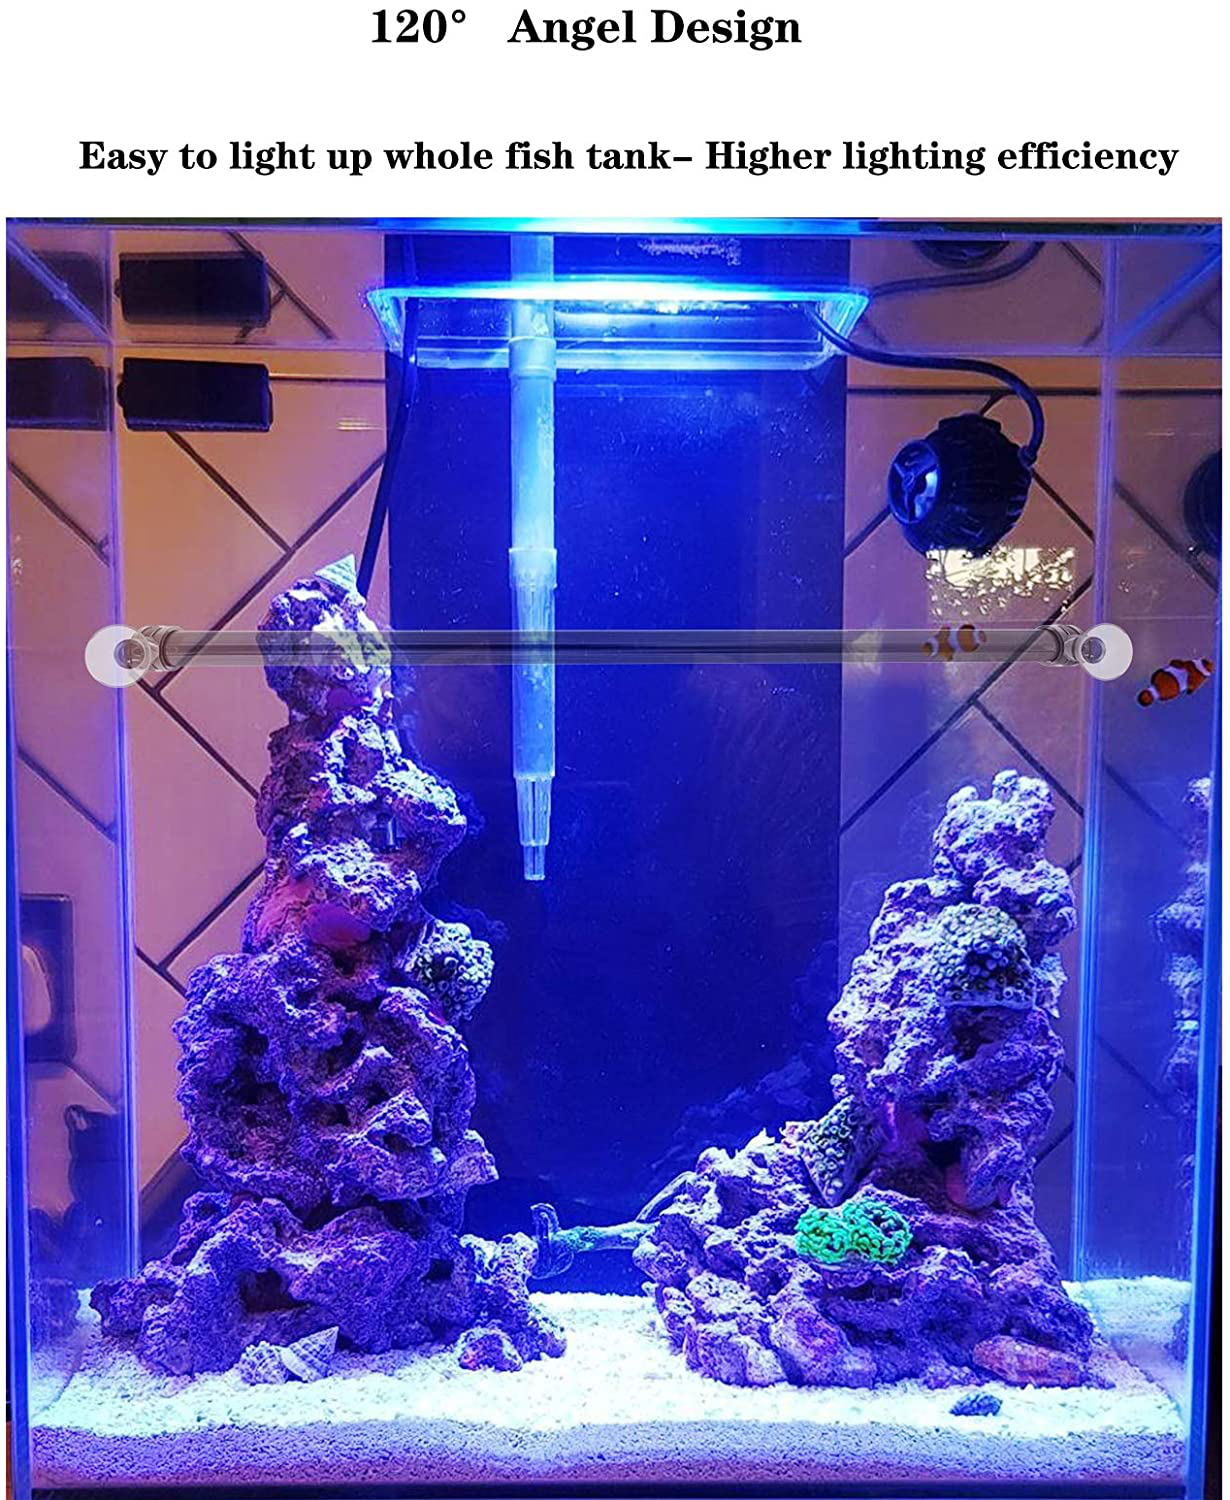 Lominie Submersible LED Aquarium Light, IP68 Waterproof Fish Tank Light with Timer, 3 Lighting Modes Dimmable Crystal Glass Light for Reef, Coral, Freshwater Refugium Algae Fish Tank